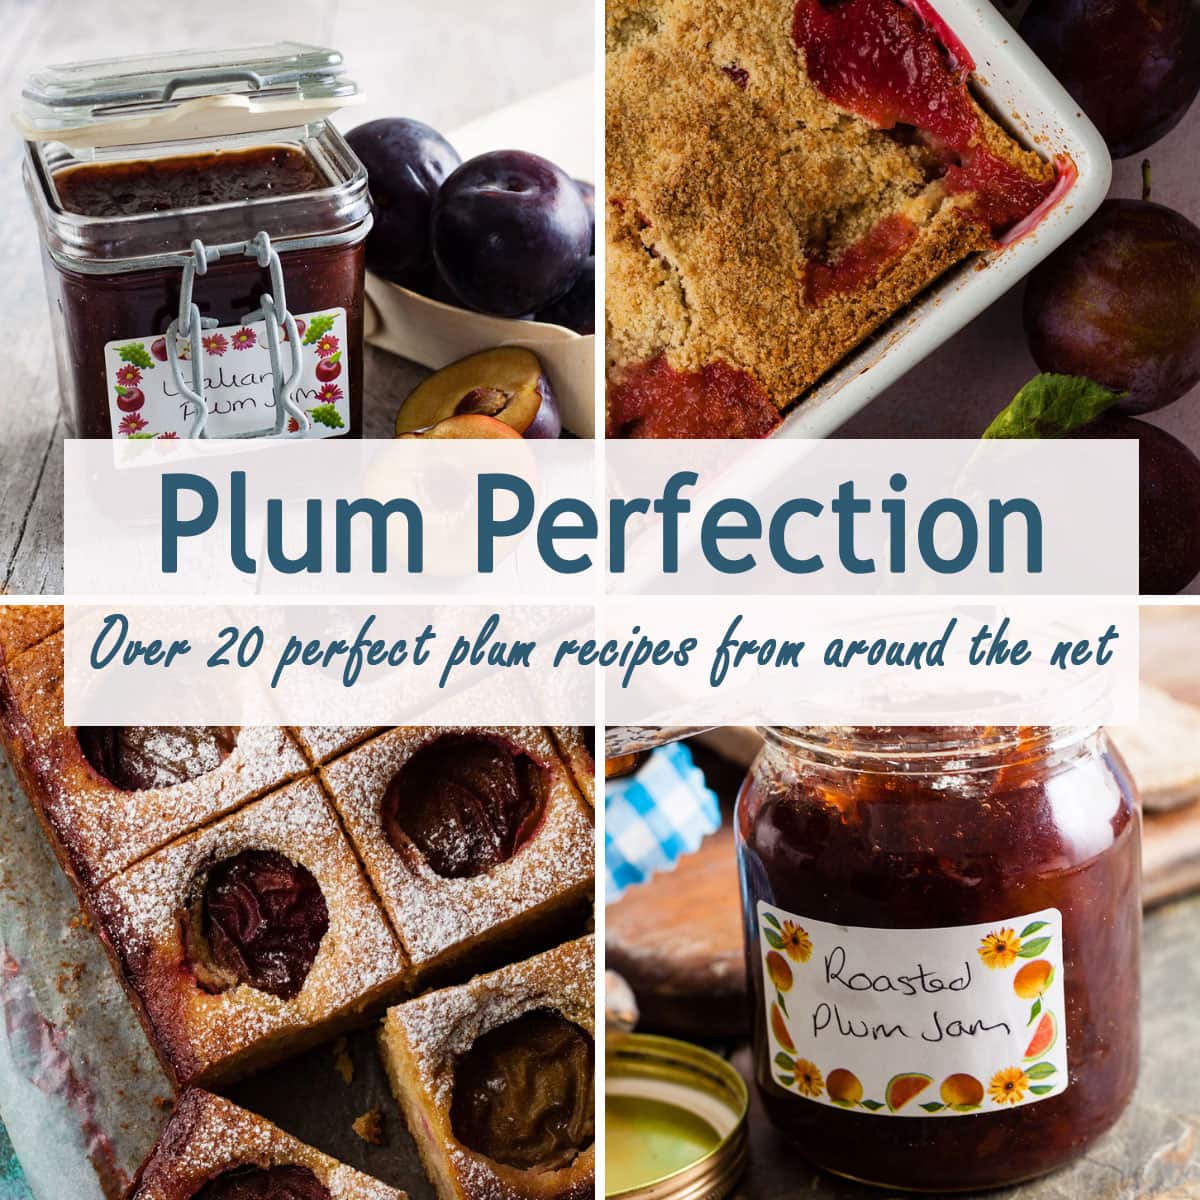 4 plum recipes in a collage with text over lay - Plum Perfection over 20 perfect plum recipes from around the net.